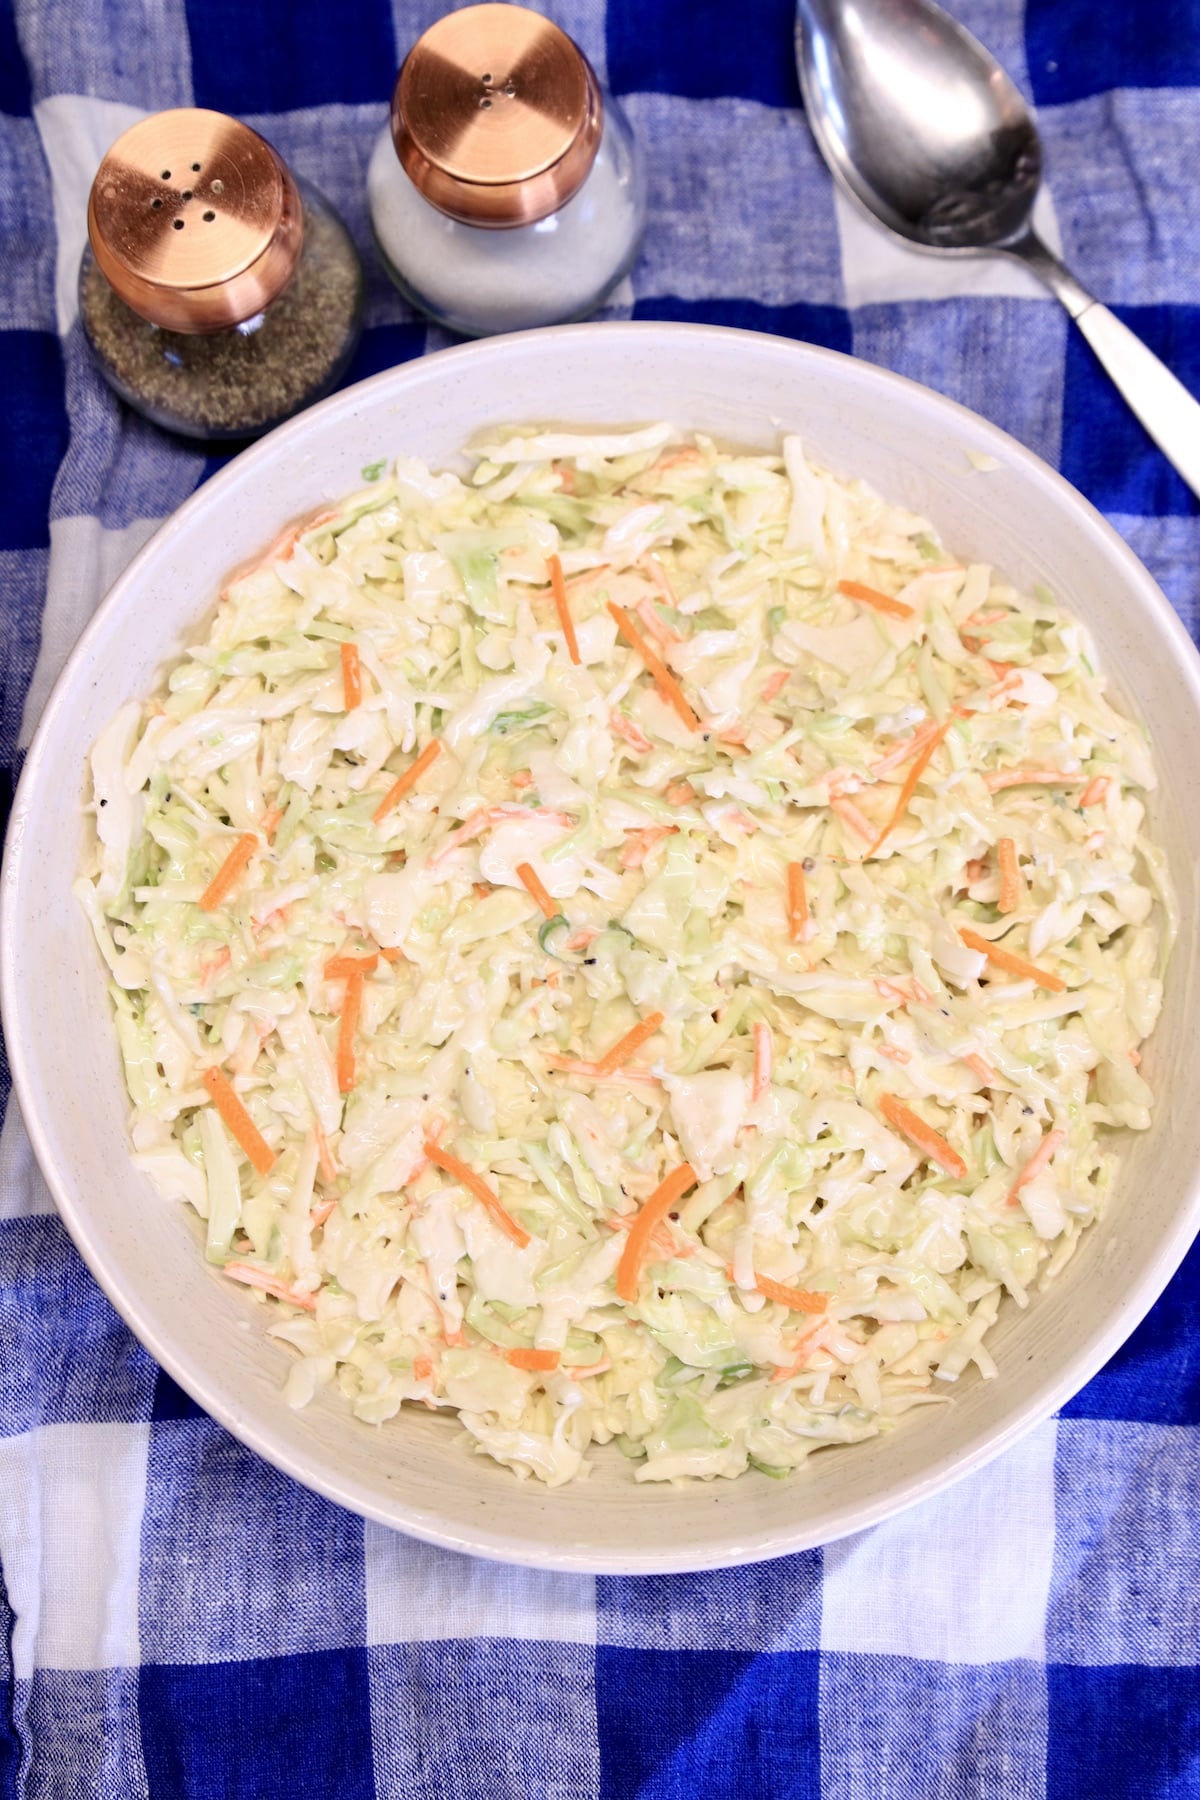 Bowl of coleslaw on a blue check cloth. Salt & pepper shaker, spoon.